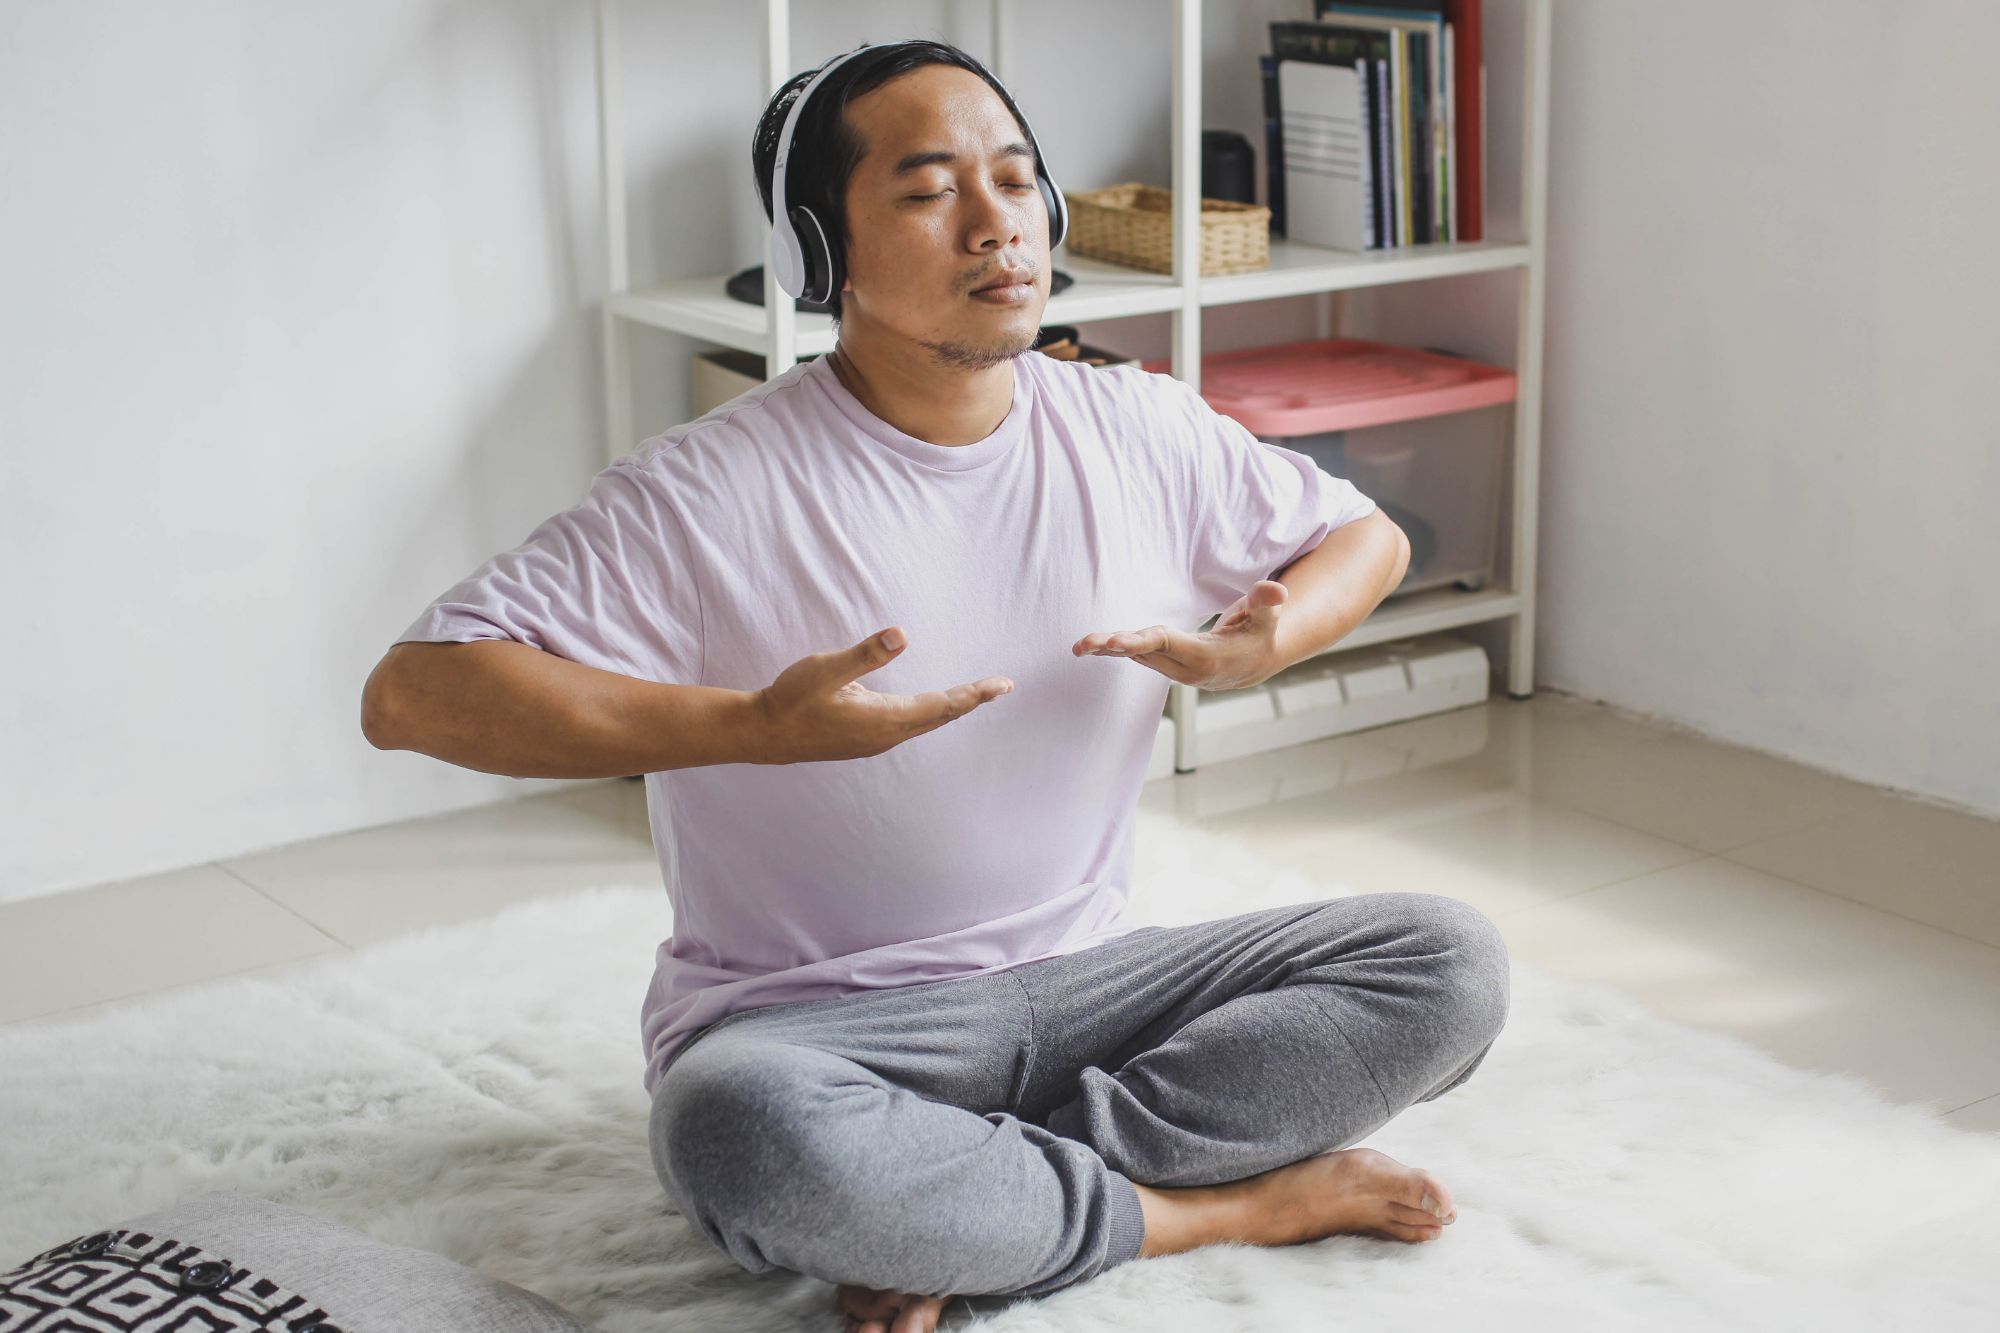 A man in lotus position breathing to a relaxing tune